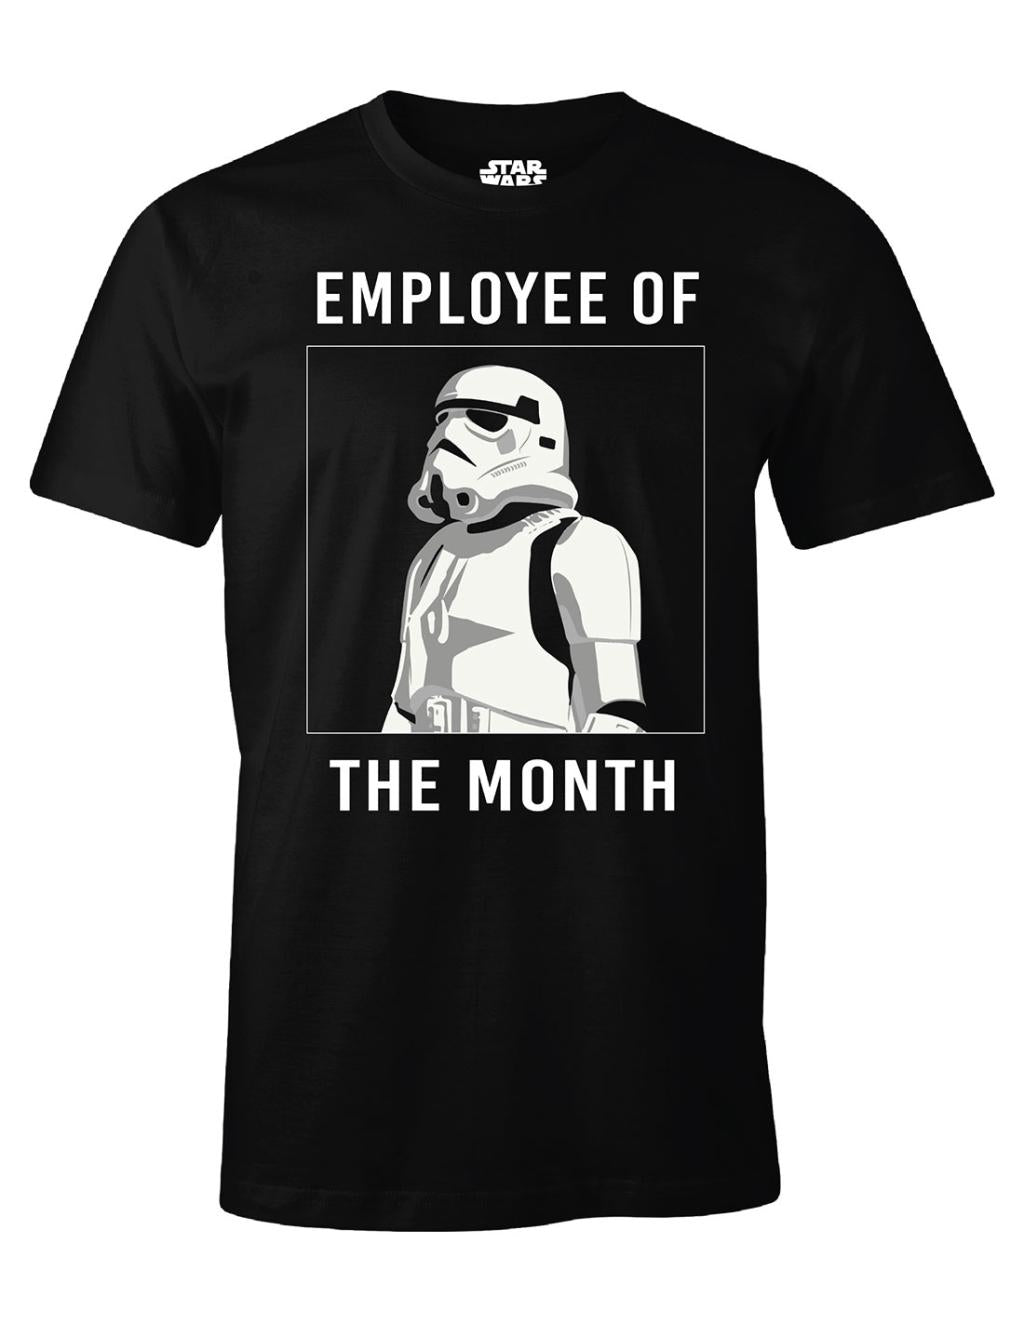 STAR WARS - Employee of the month - T-Shirt (XXL)